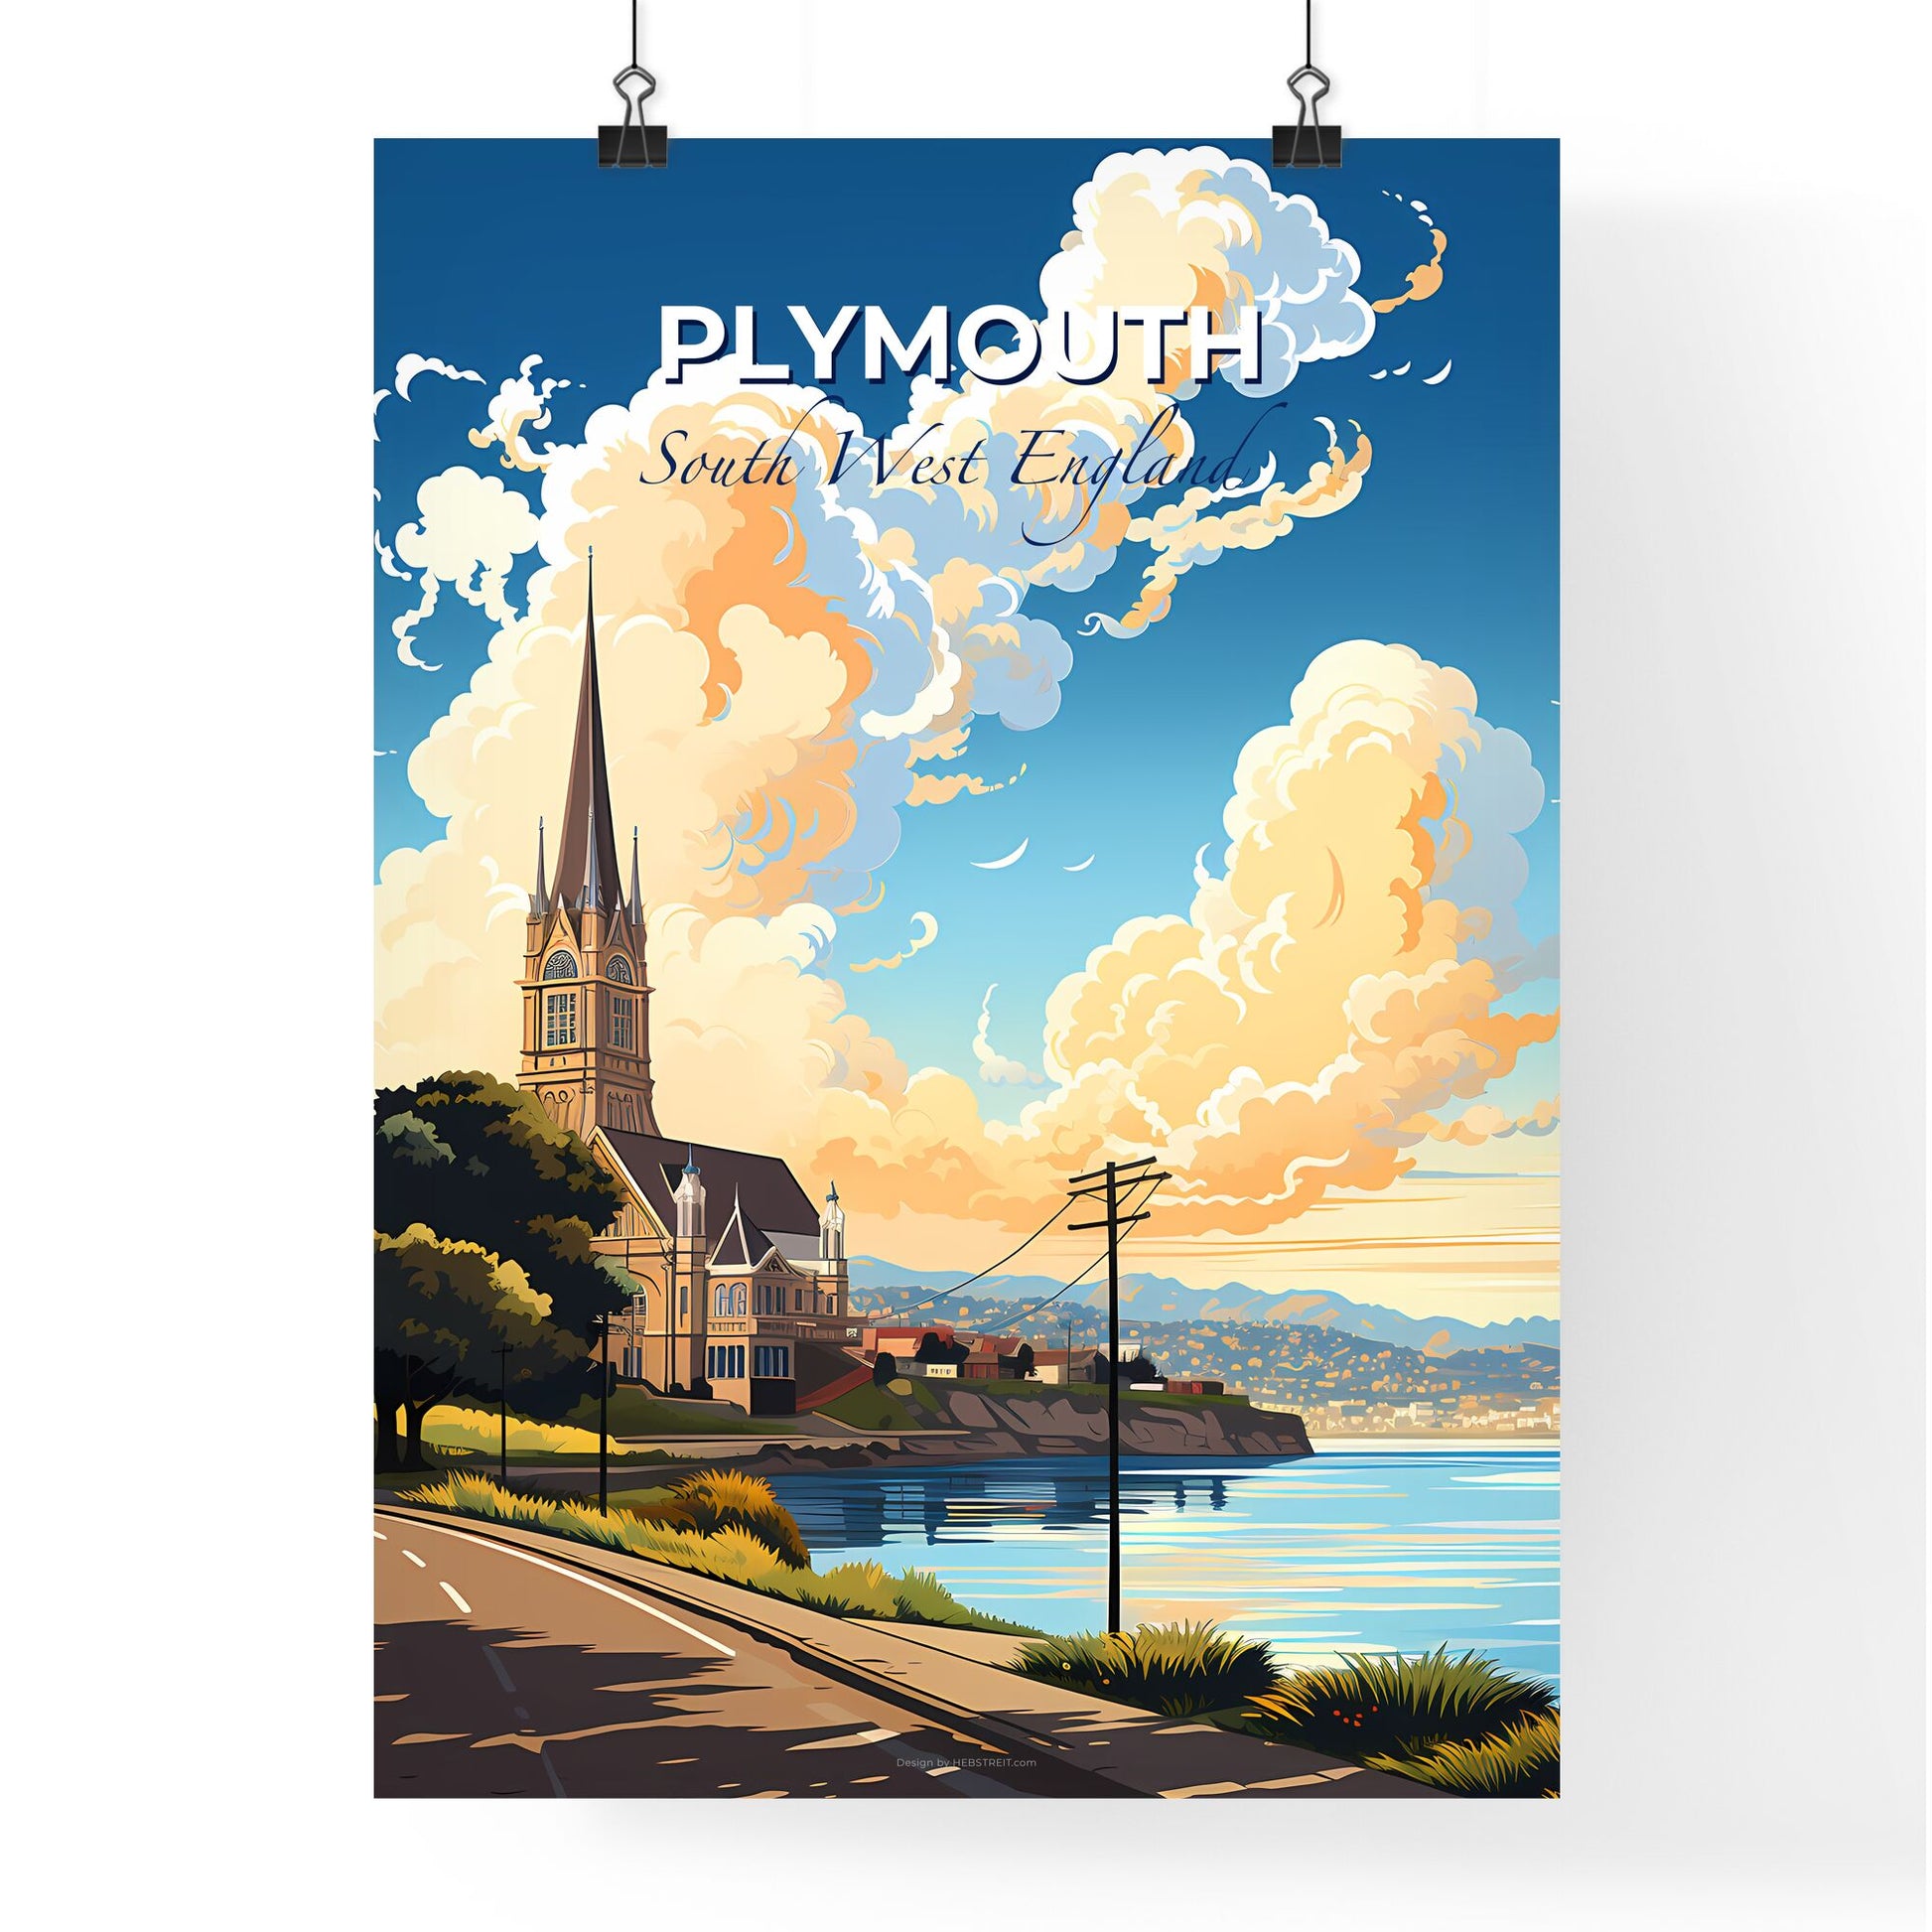 Plymouth, South West England, A Poster of a church on the side of a road by water Default Title